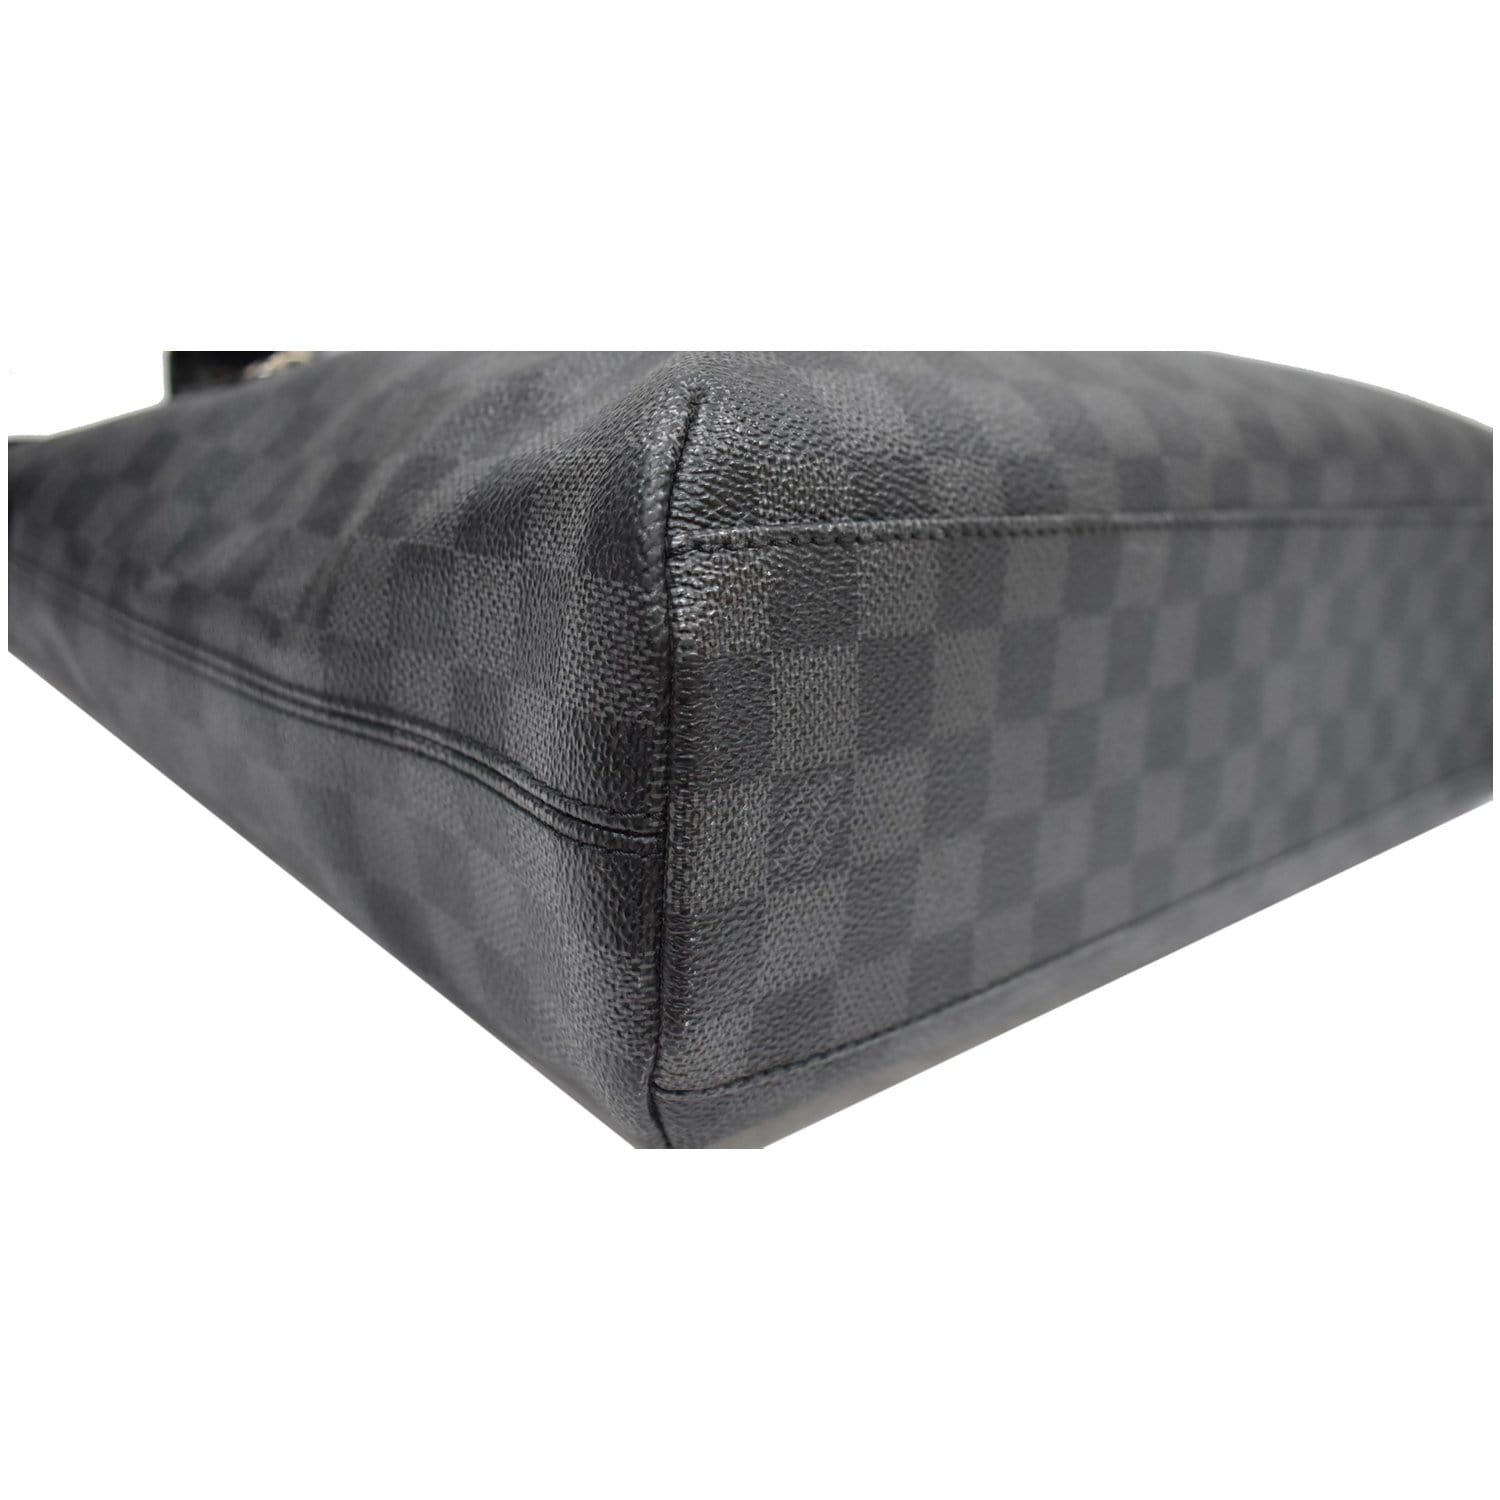 LOUIS VUITTON Damier Graphite Canvas and Calfskin Leather